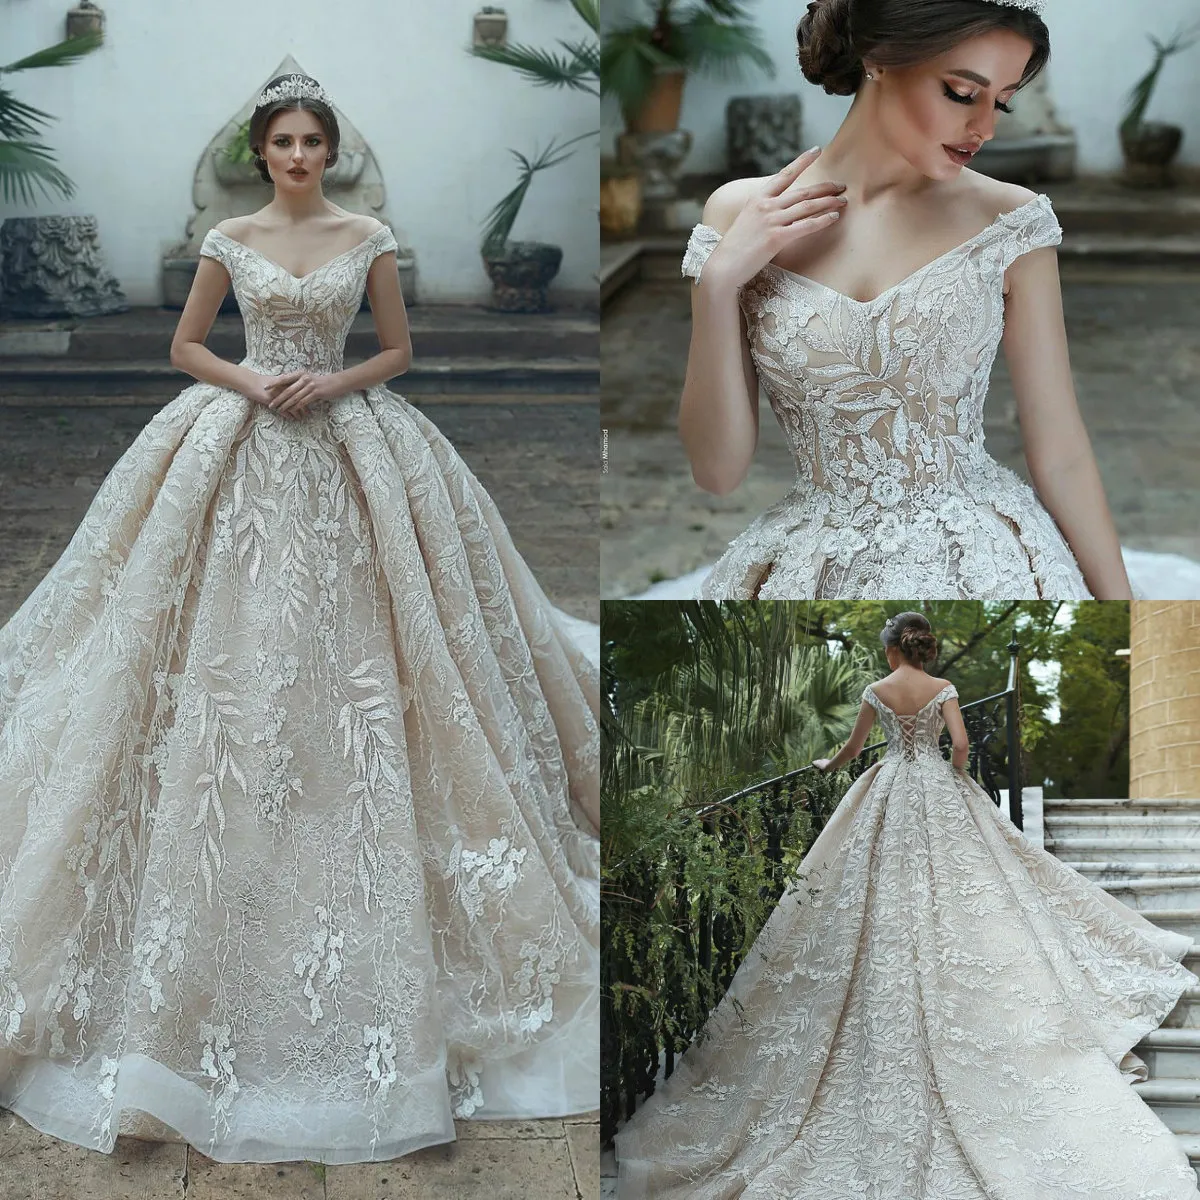 2019 Vintage Plus Size Wedding Dresses Off Shoulder Appliques Lace Ball Gown Wedding Dress with Long Train Luxury Bridal Gowns